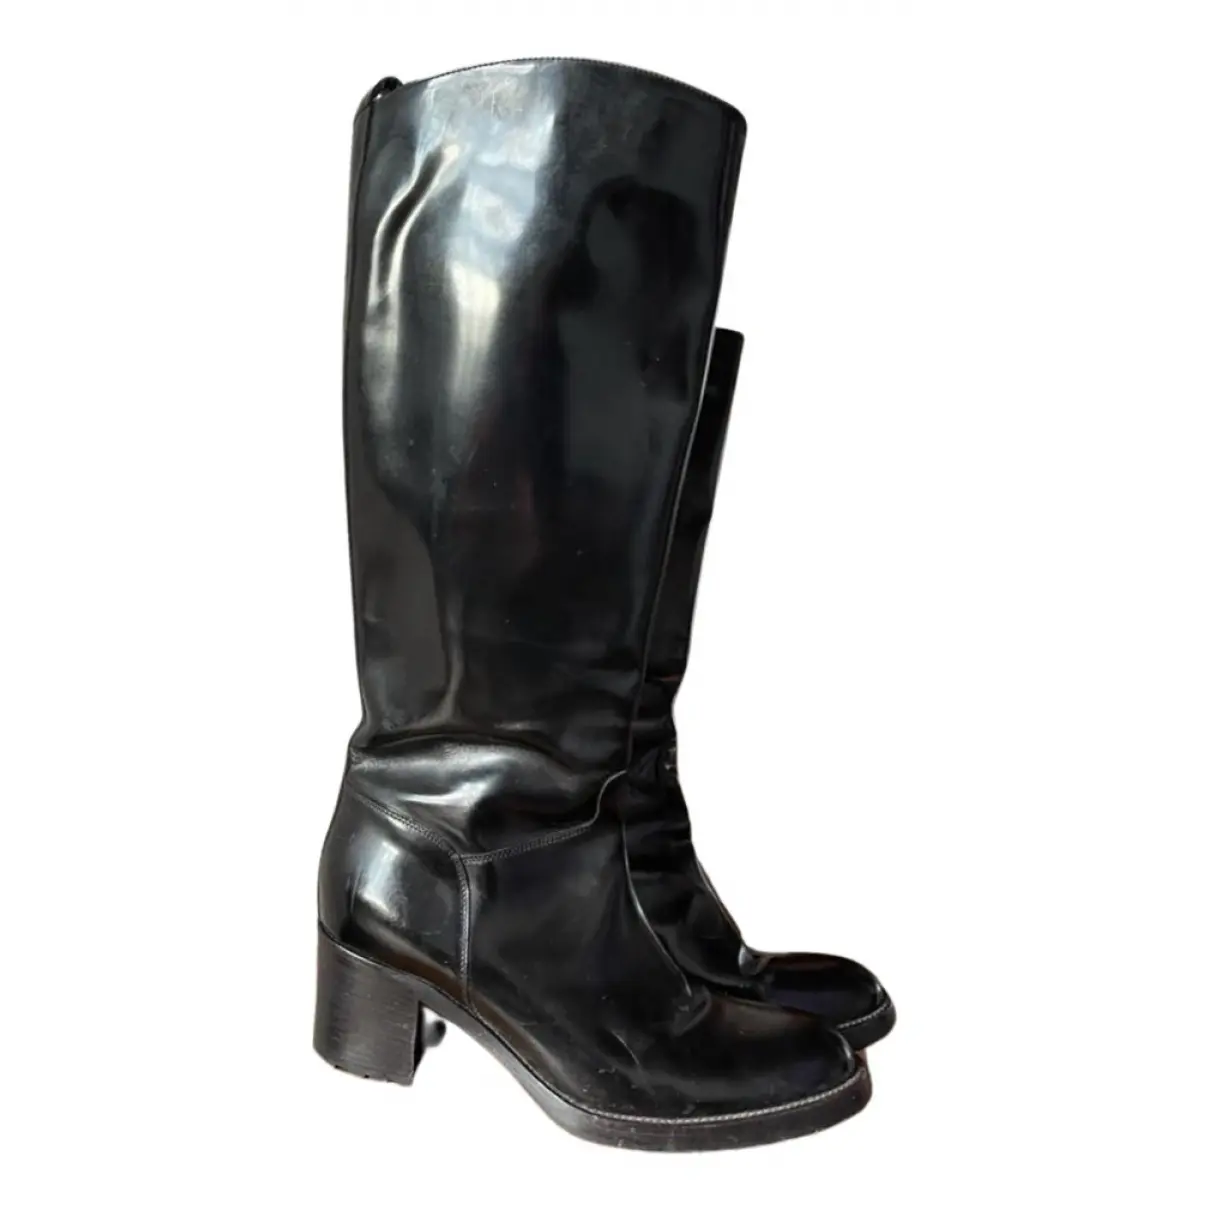 Patent leather riding boots Sartore